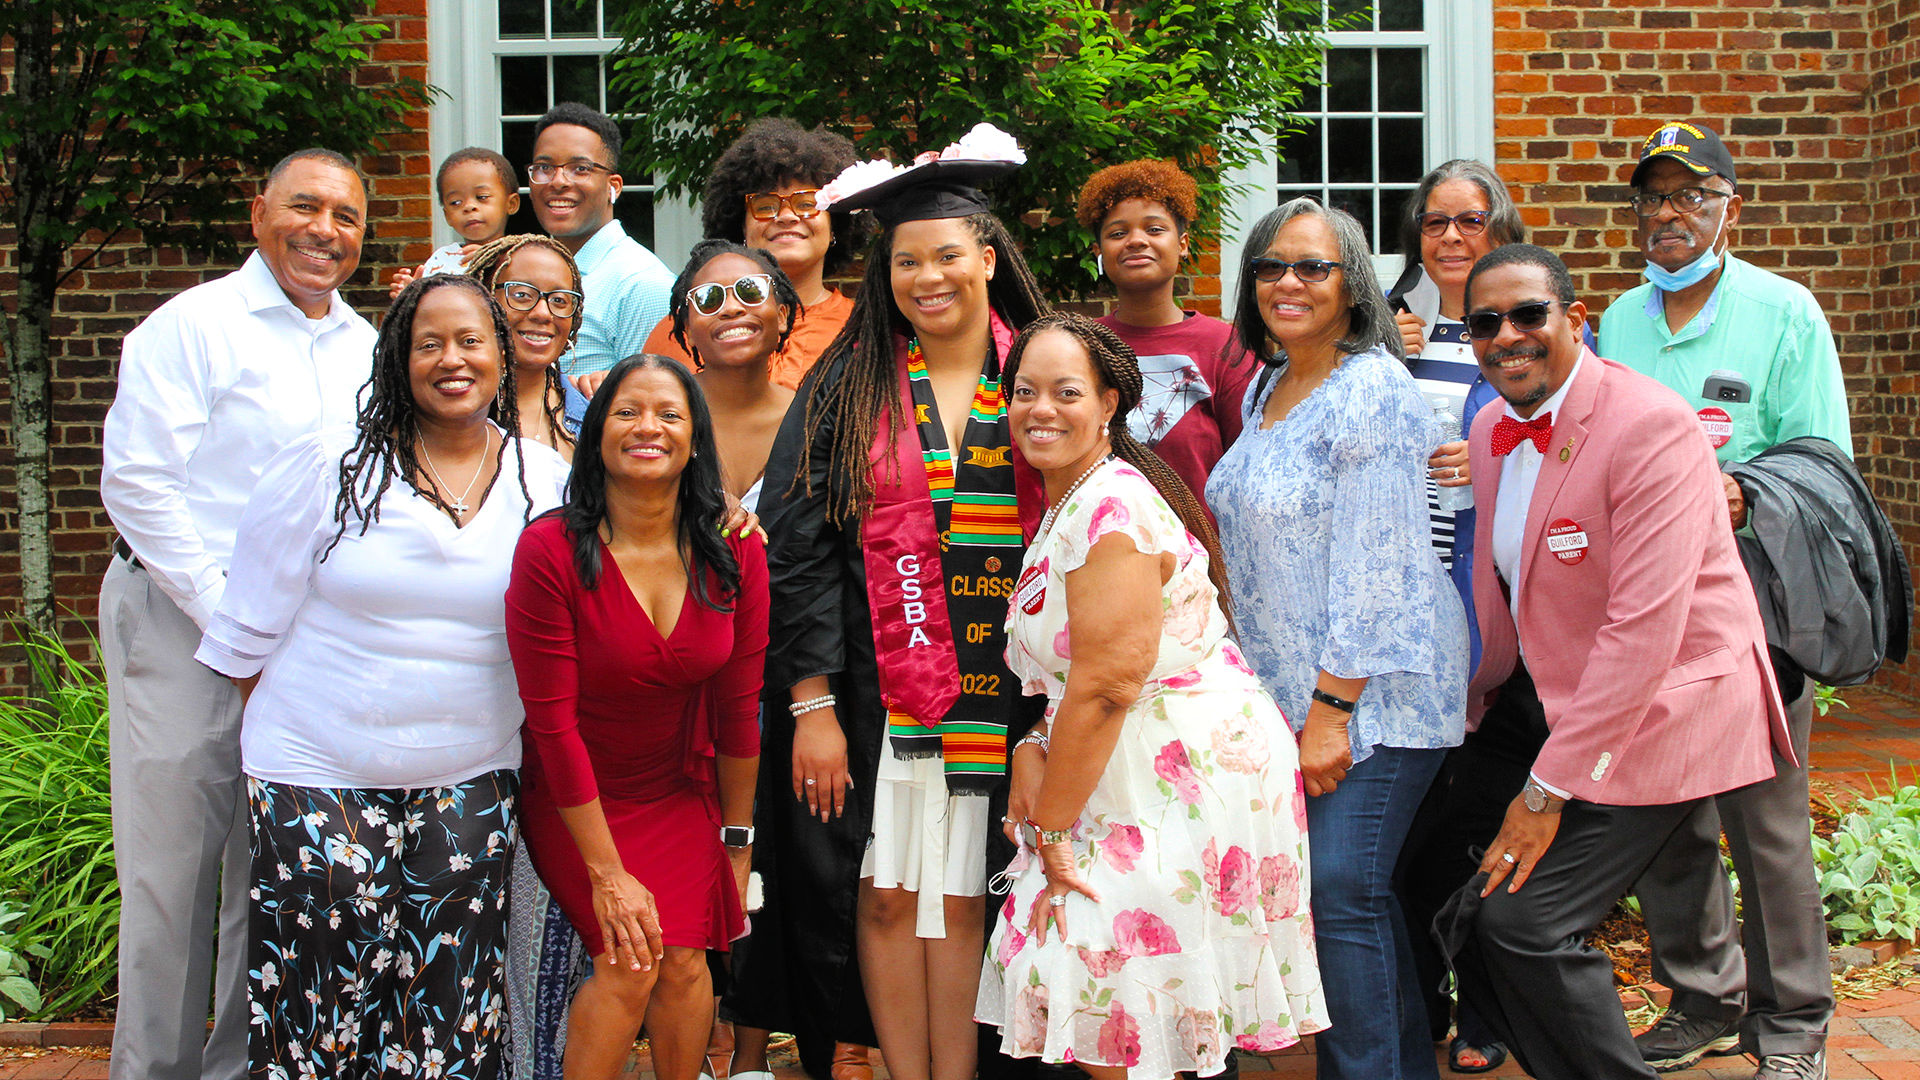 A graduate is surrounded by several friends and family for a photo outdoors after Commencement.